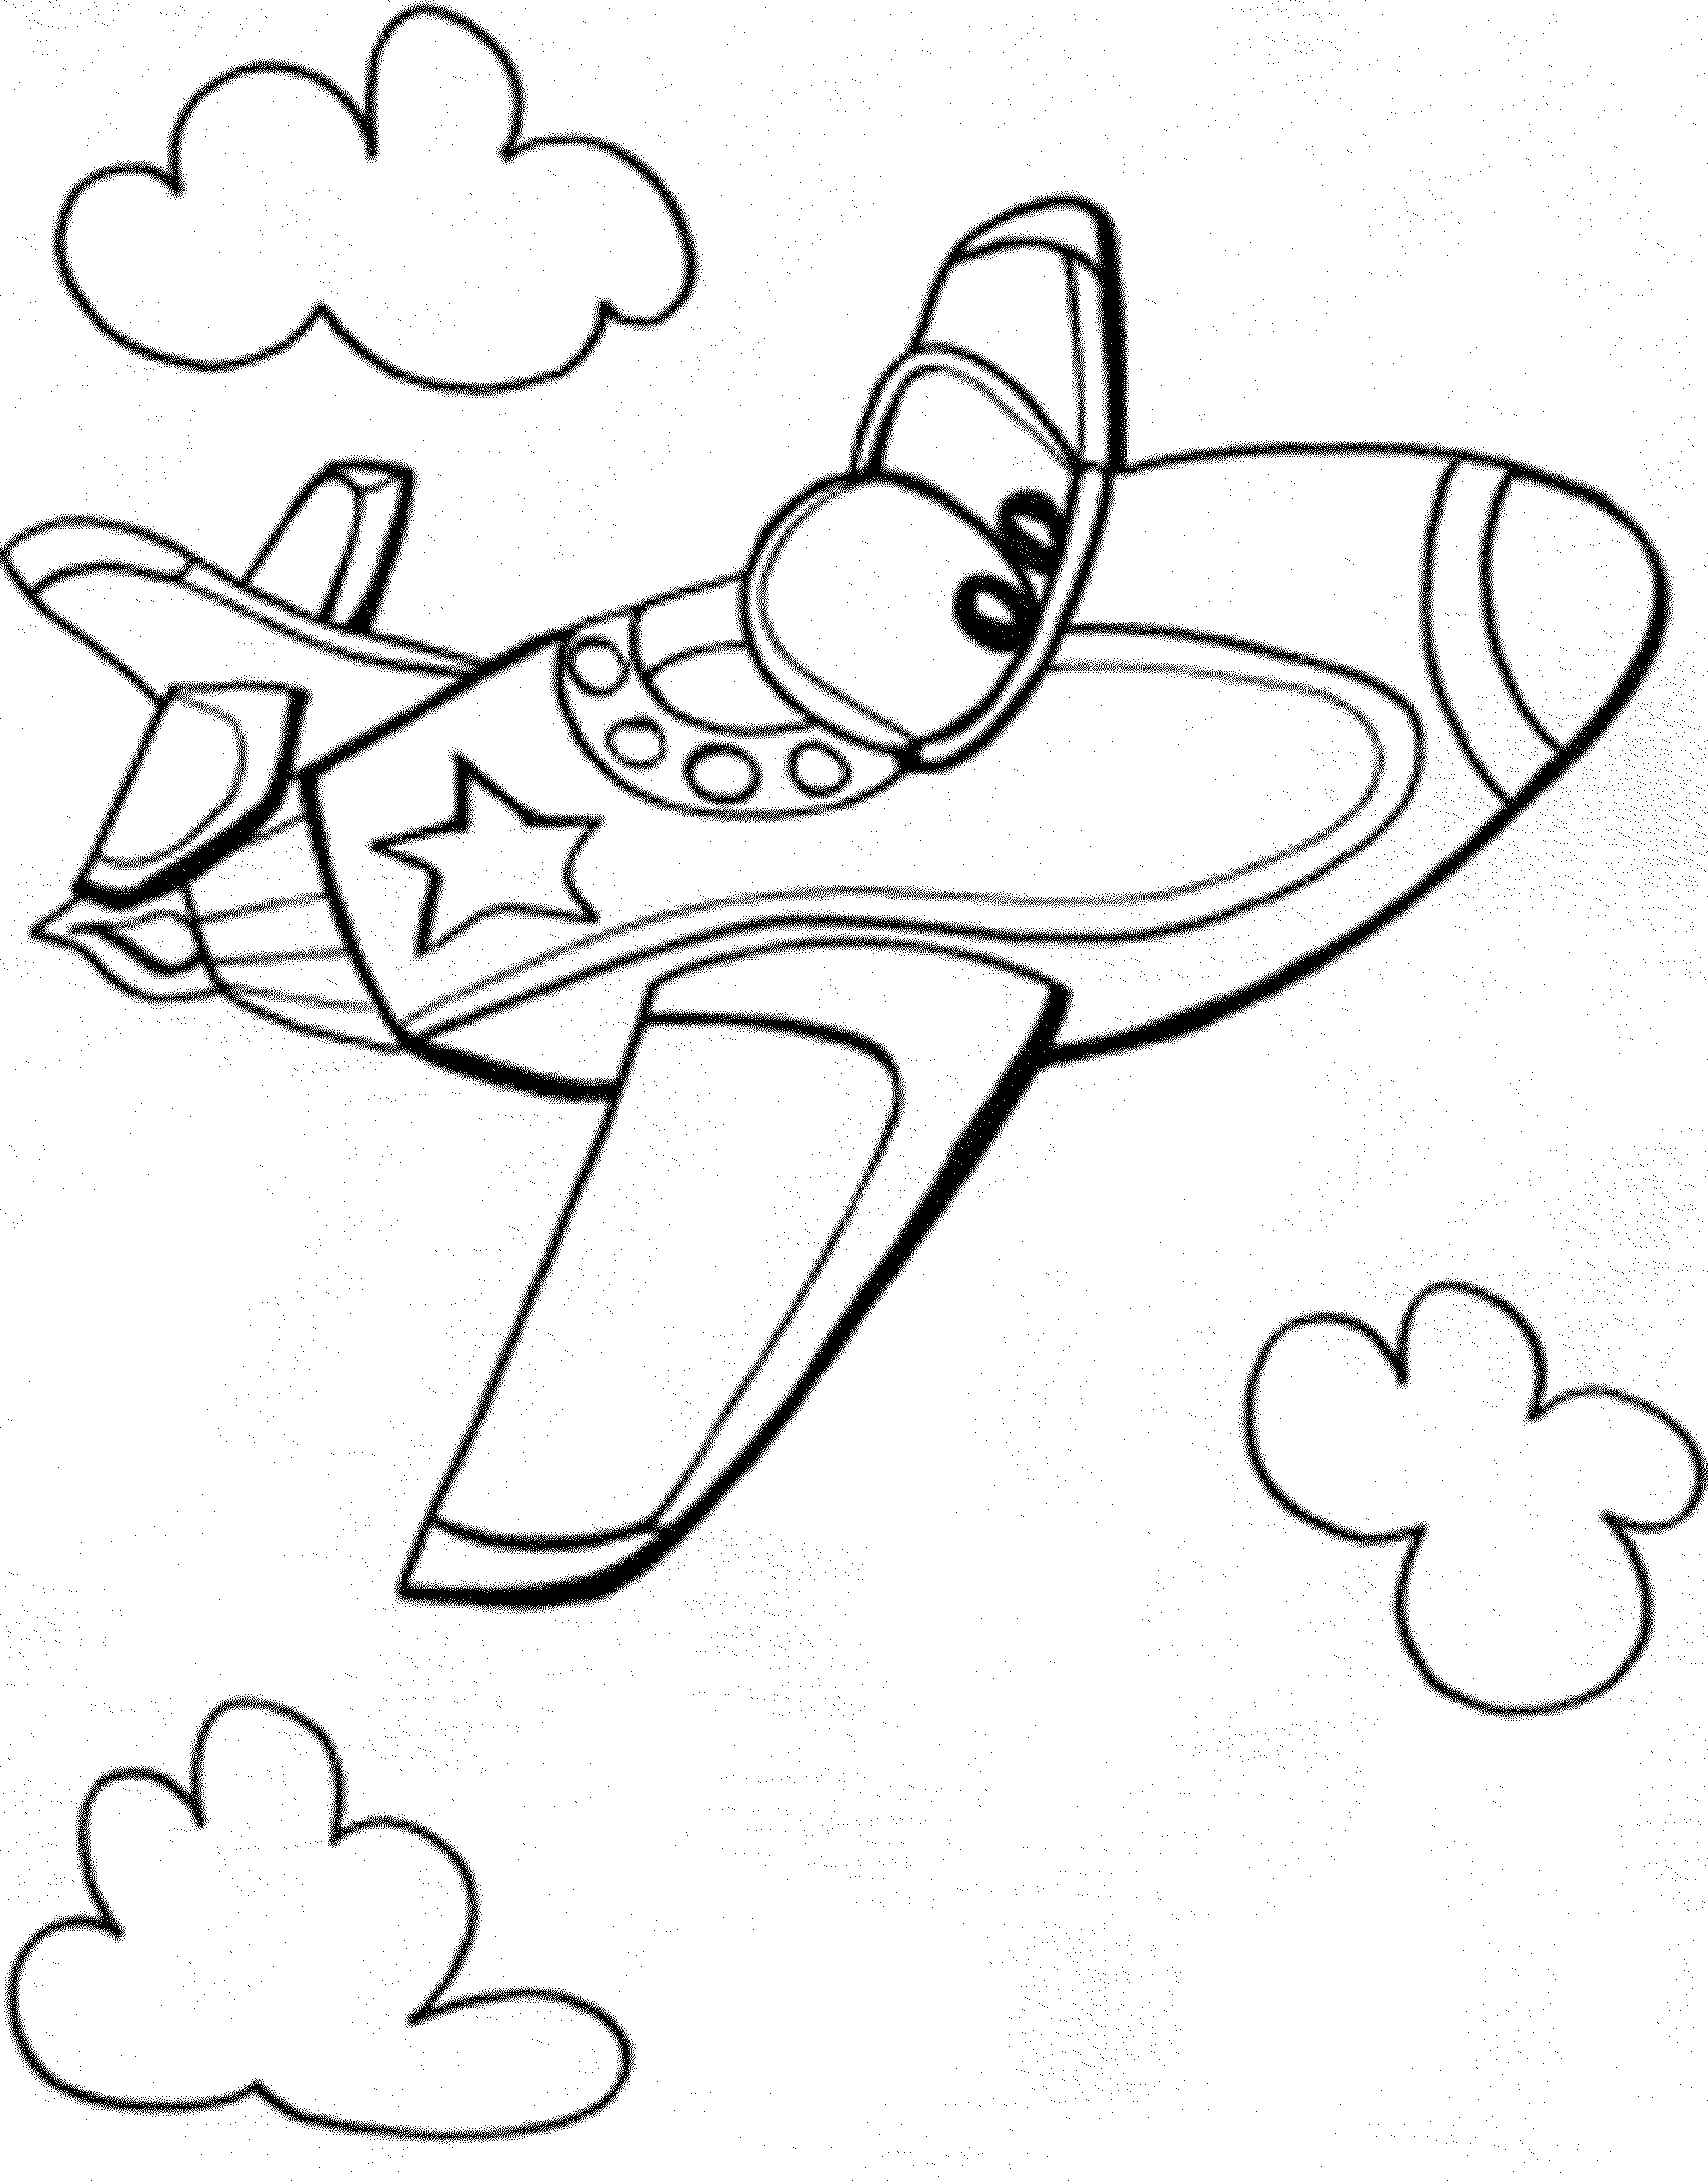 Air Plane 8 Cool Coloring Page